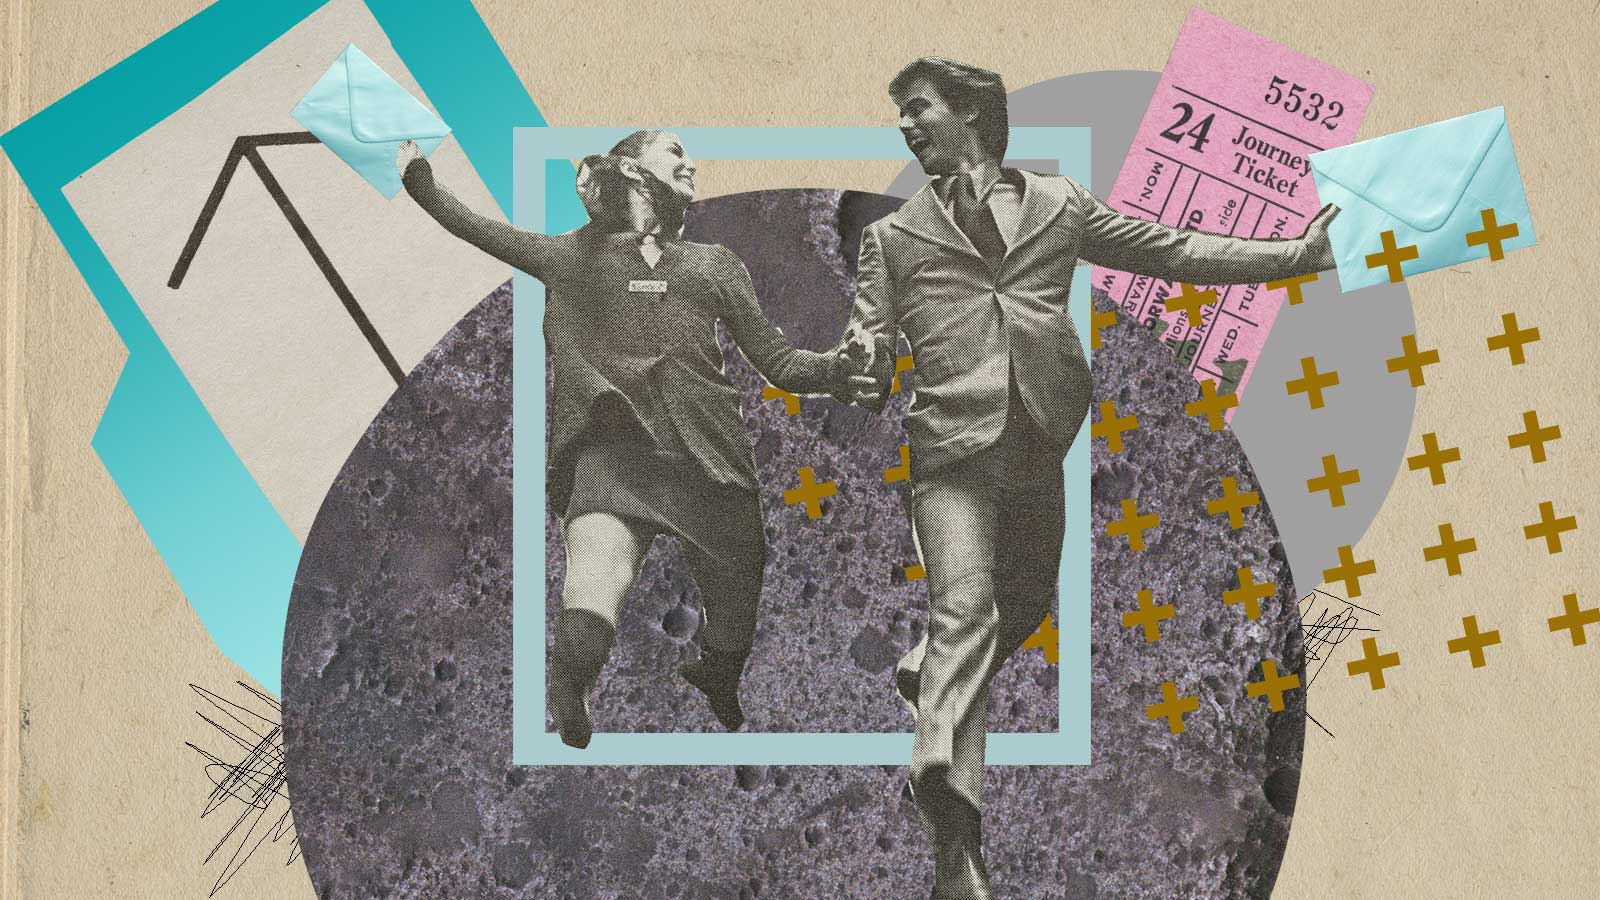 man and woman jumping over moon - surreal collage